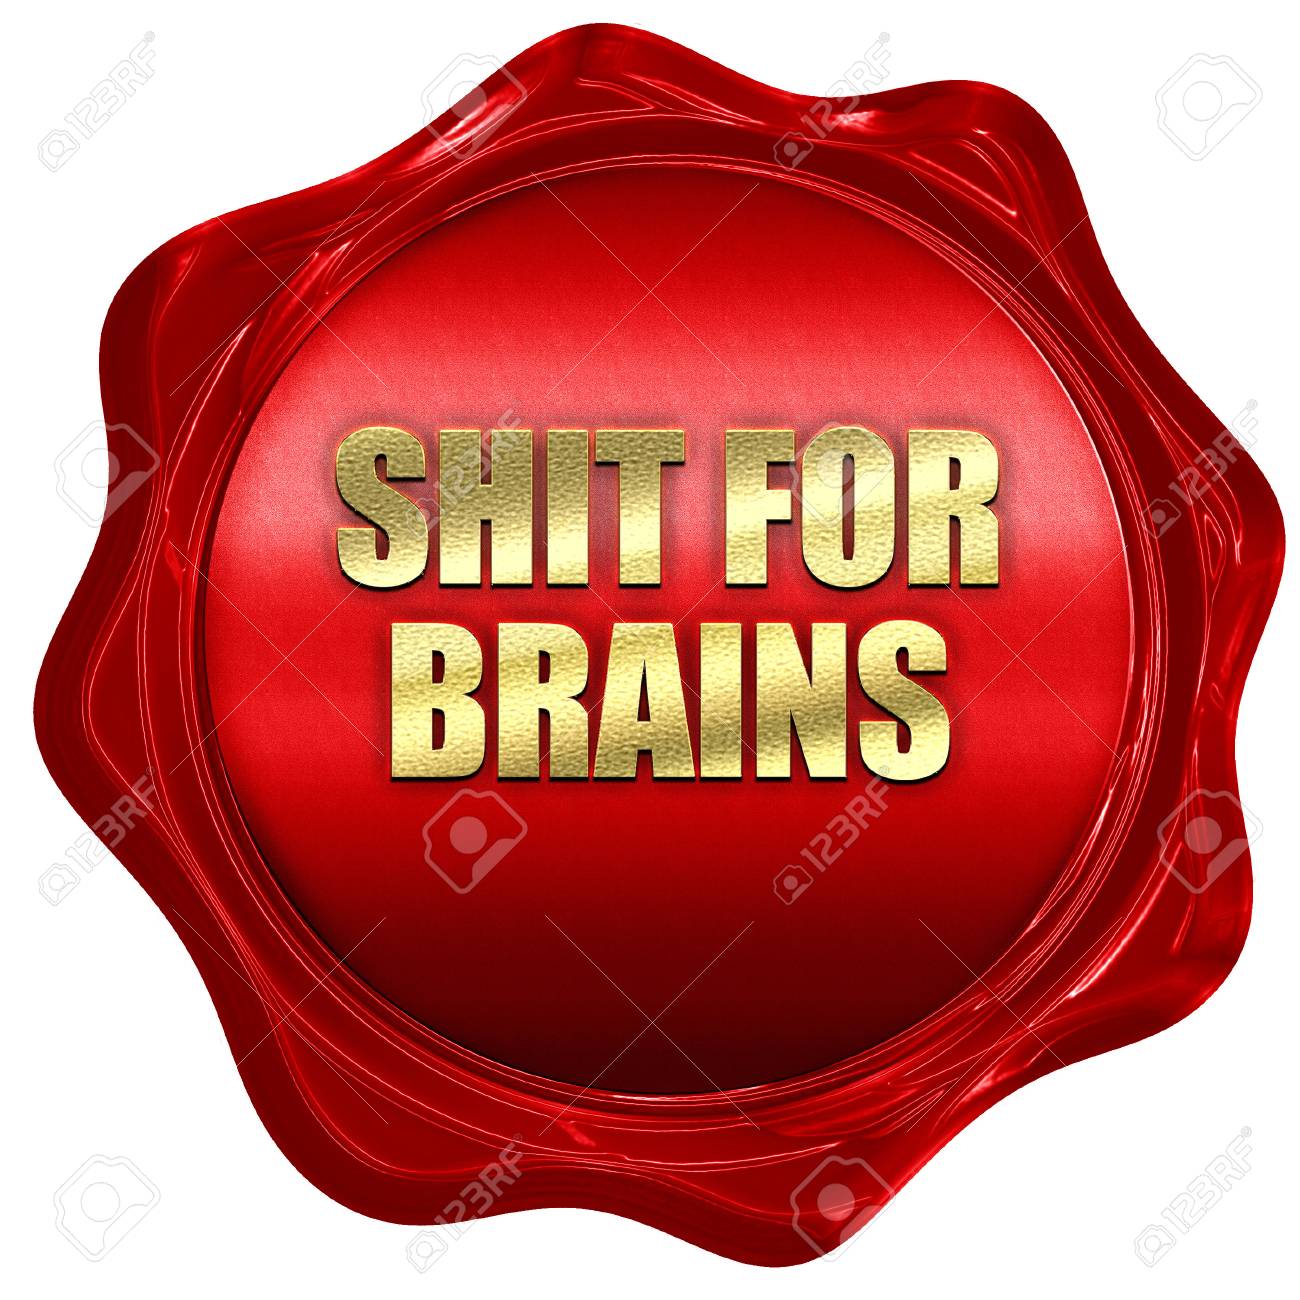 71852717-shit-for-brains-3d-rendering-red-wax-stamp-with-text.jpg